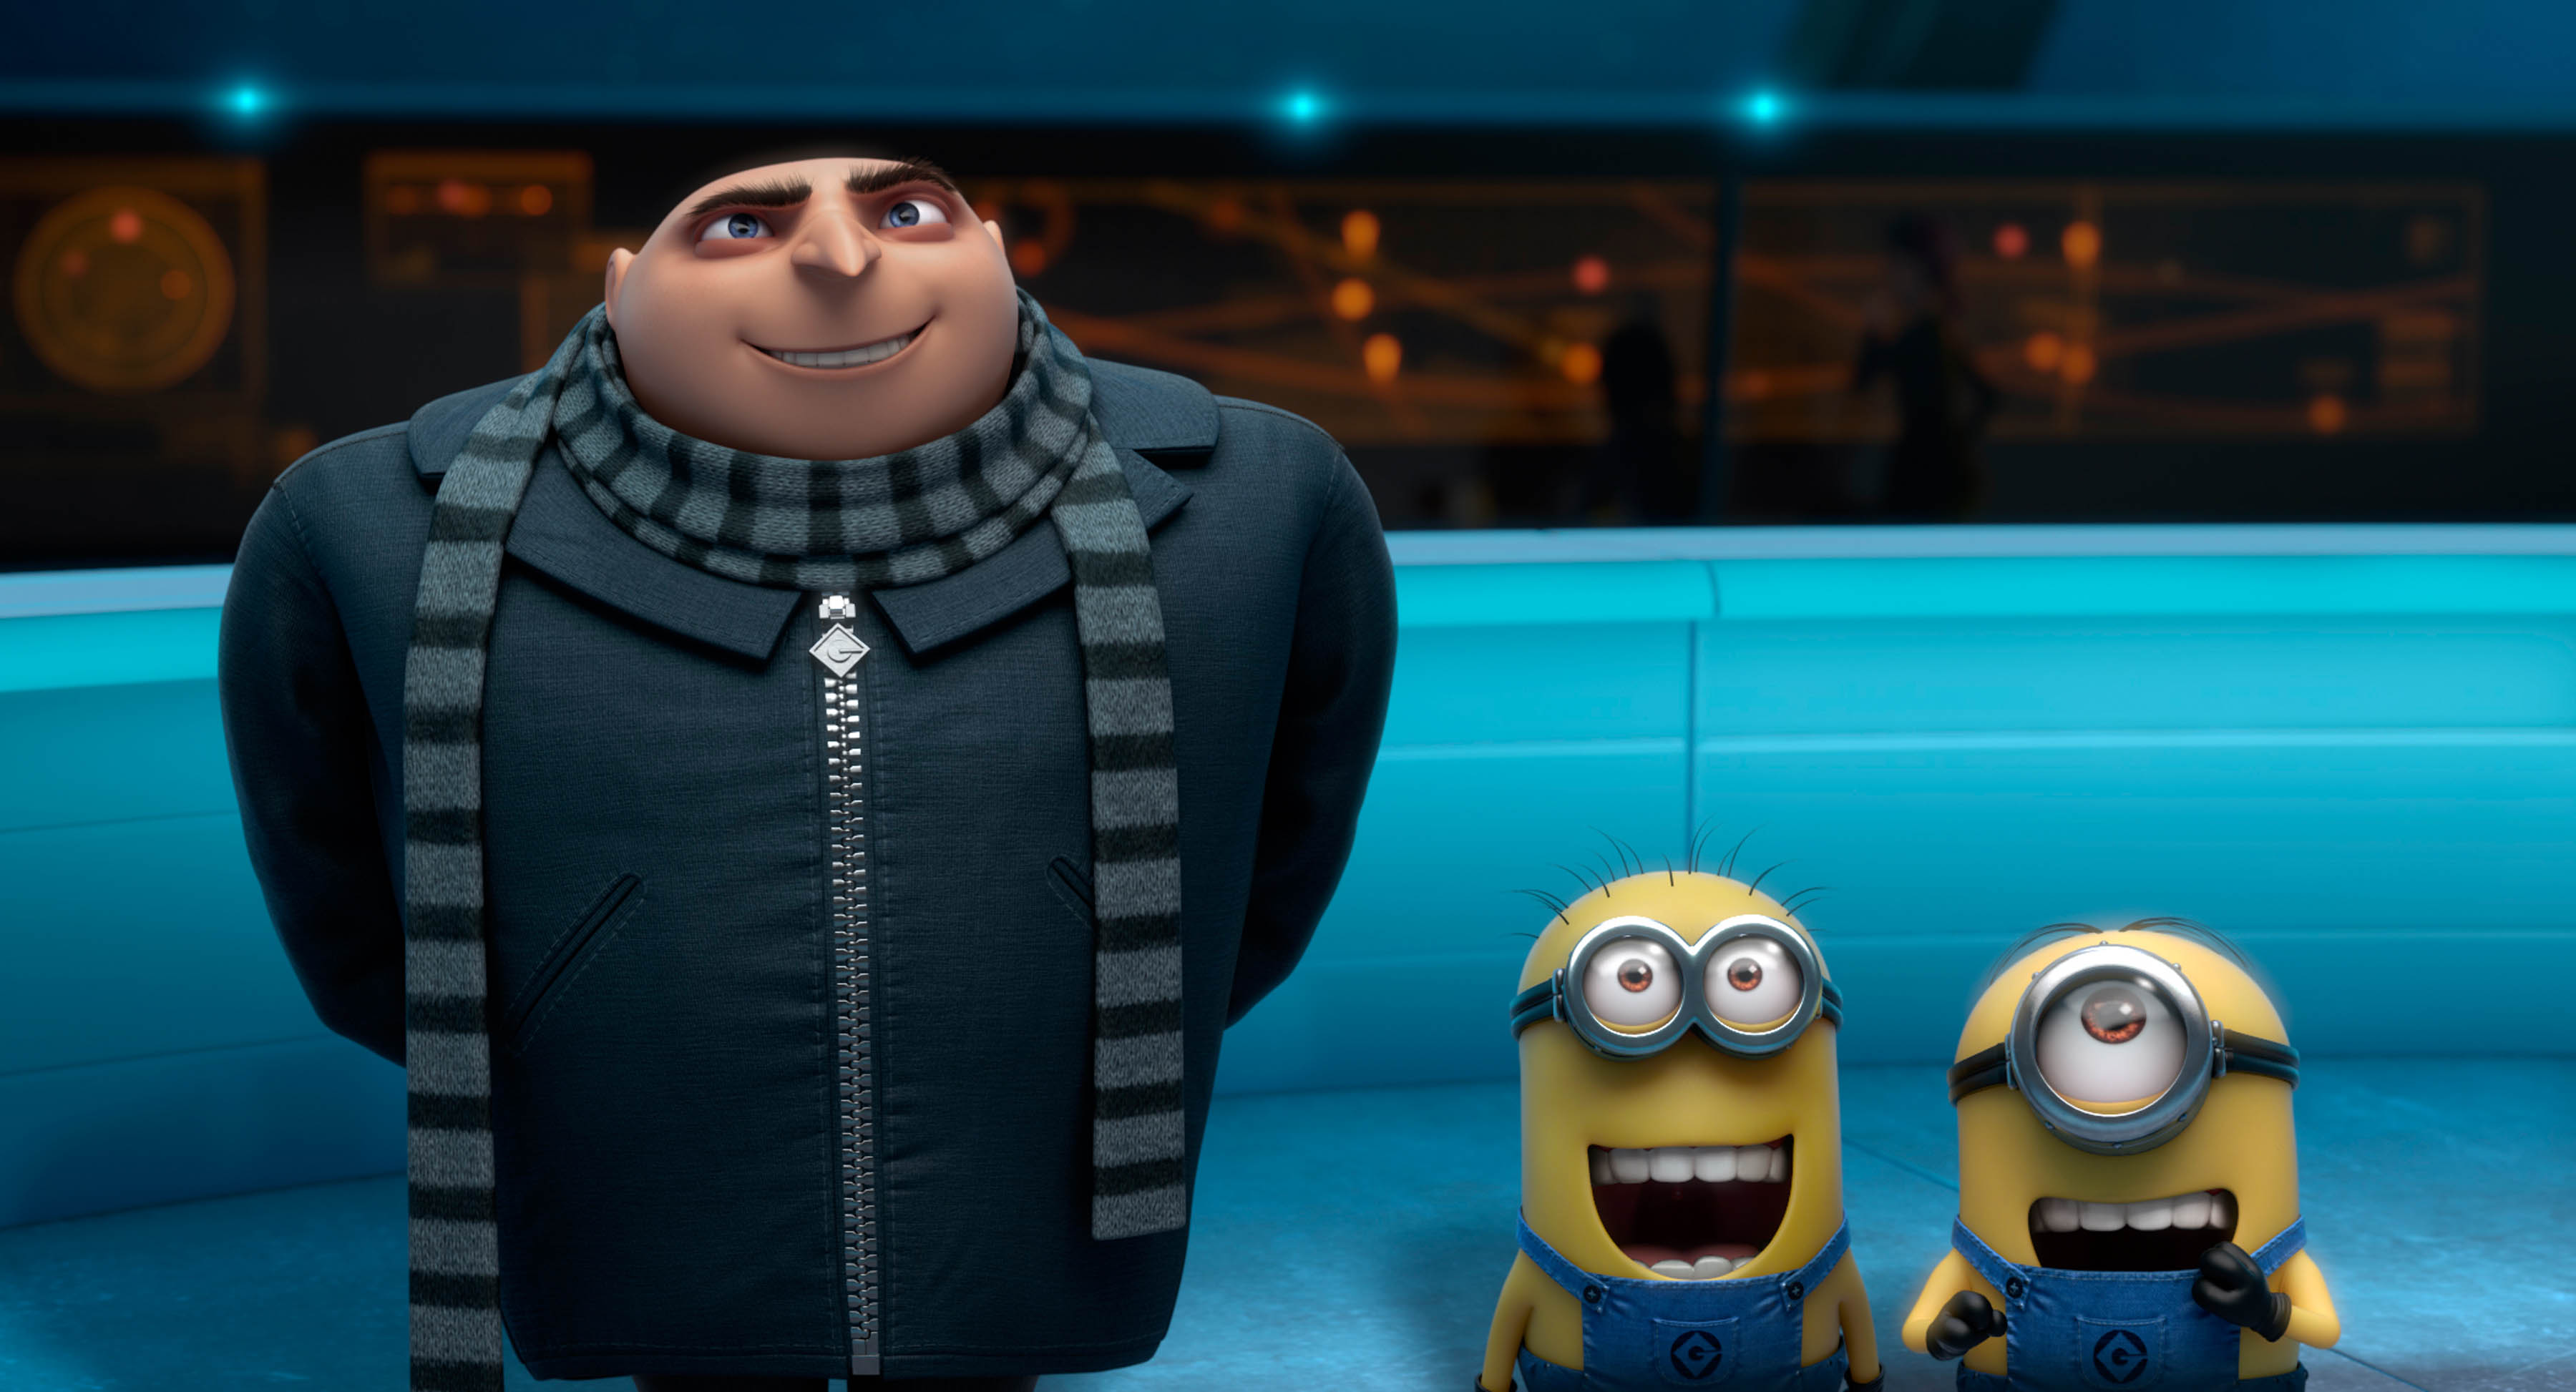 Fans are eager for more adventure with Gru and his Minions, and are frustrated by the long wait for Minions 3